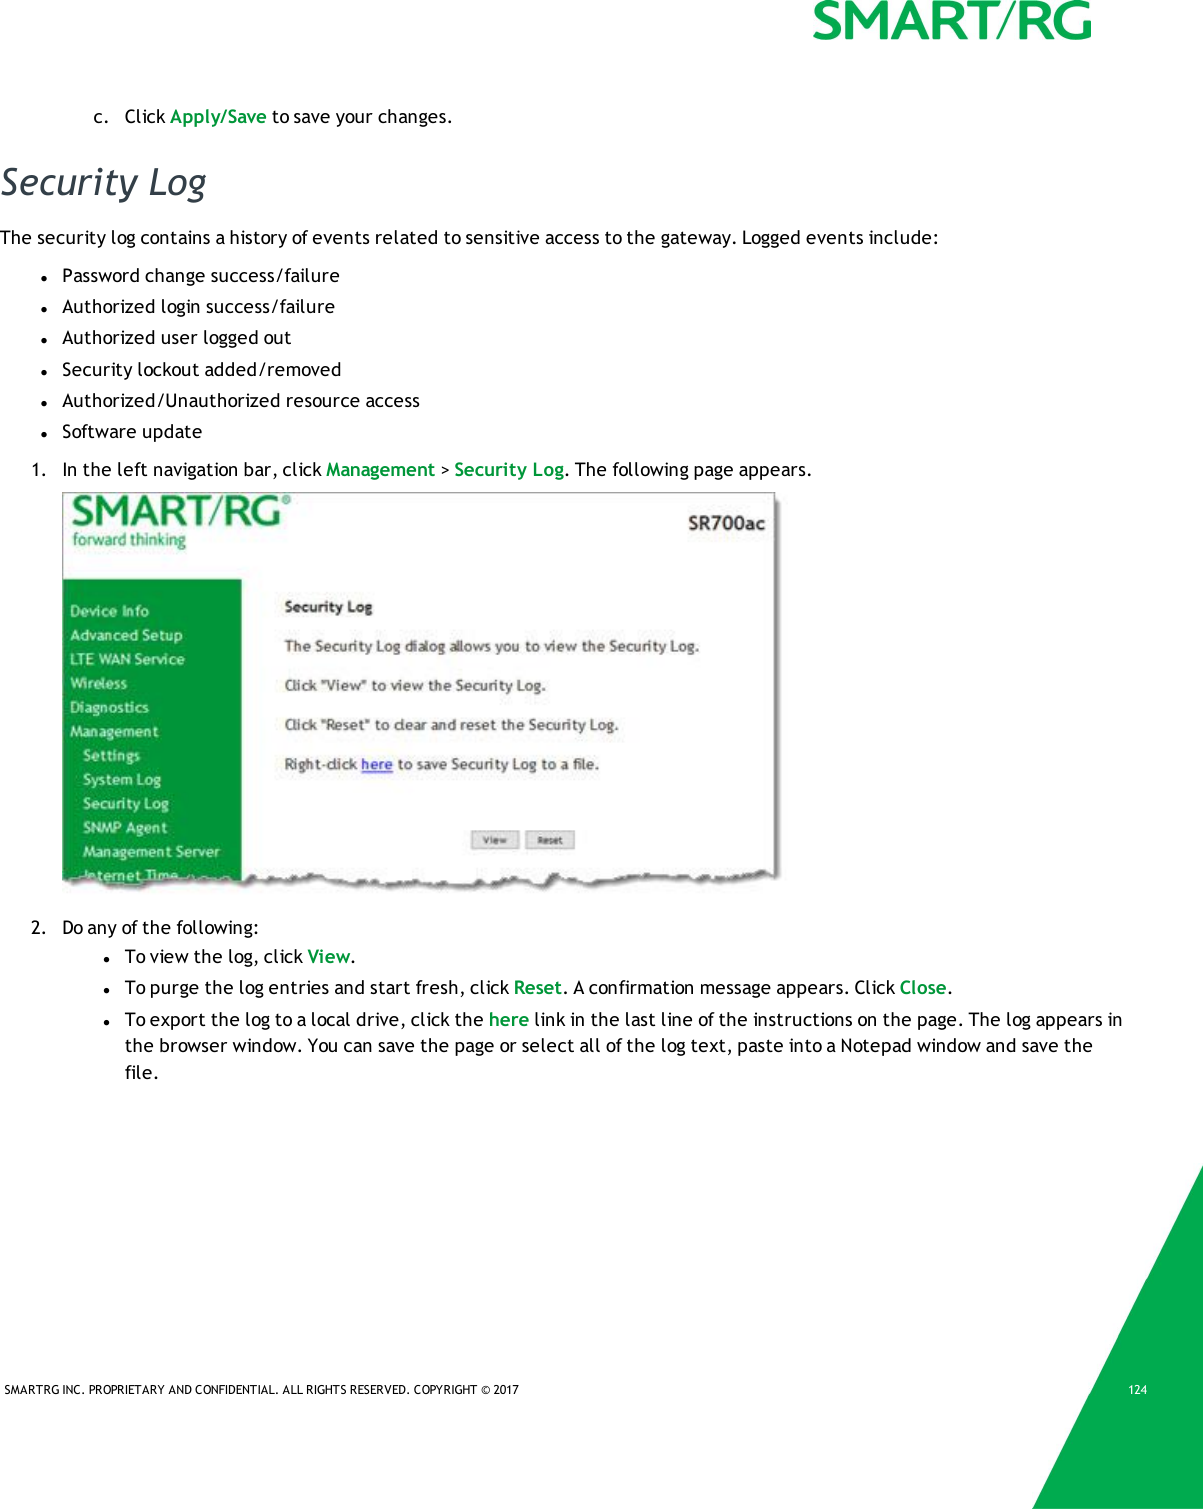 SMARTRG INC. PROPRIETARY AND CONFIDENTIAL. ALL RIGHTS RESERVED. COPYRIGHT © 2017 124c. Click Apply/Save to save your changes.Security LogThe security log contains a history of events related to sensitive access to the gateway. Logged events include:lPassword change success/failurelAuthorized login success/failurelAuthorized user logged outlSecurity lockout added/removedlAuthorized/Unauthorized resource accesslSoftware update1. In the left navigation bar, click Management &gt;Security Log. The following page appears.2. Do any of the following:lTo view the log, click View.lTo purge the log entries and start fresh, click Reset. A confirmation message appears. Click Close.lTo export the log to a local drive, click the here link in the last line of the instructions on the page. The log appears inthe browser window. You can save the page or select all of the log text, paste into a Notepad window and save thefile.